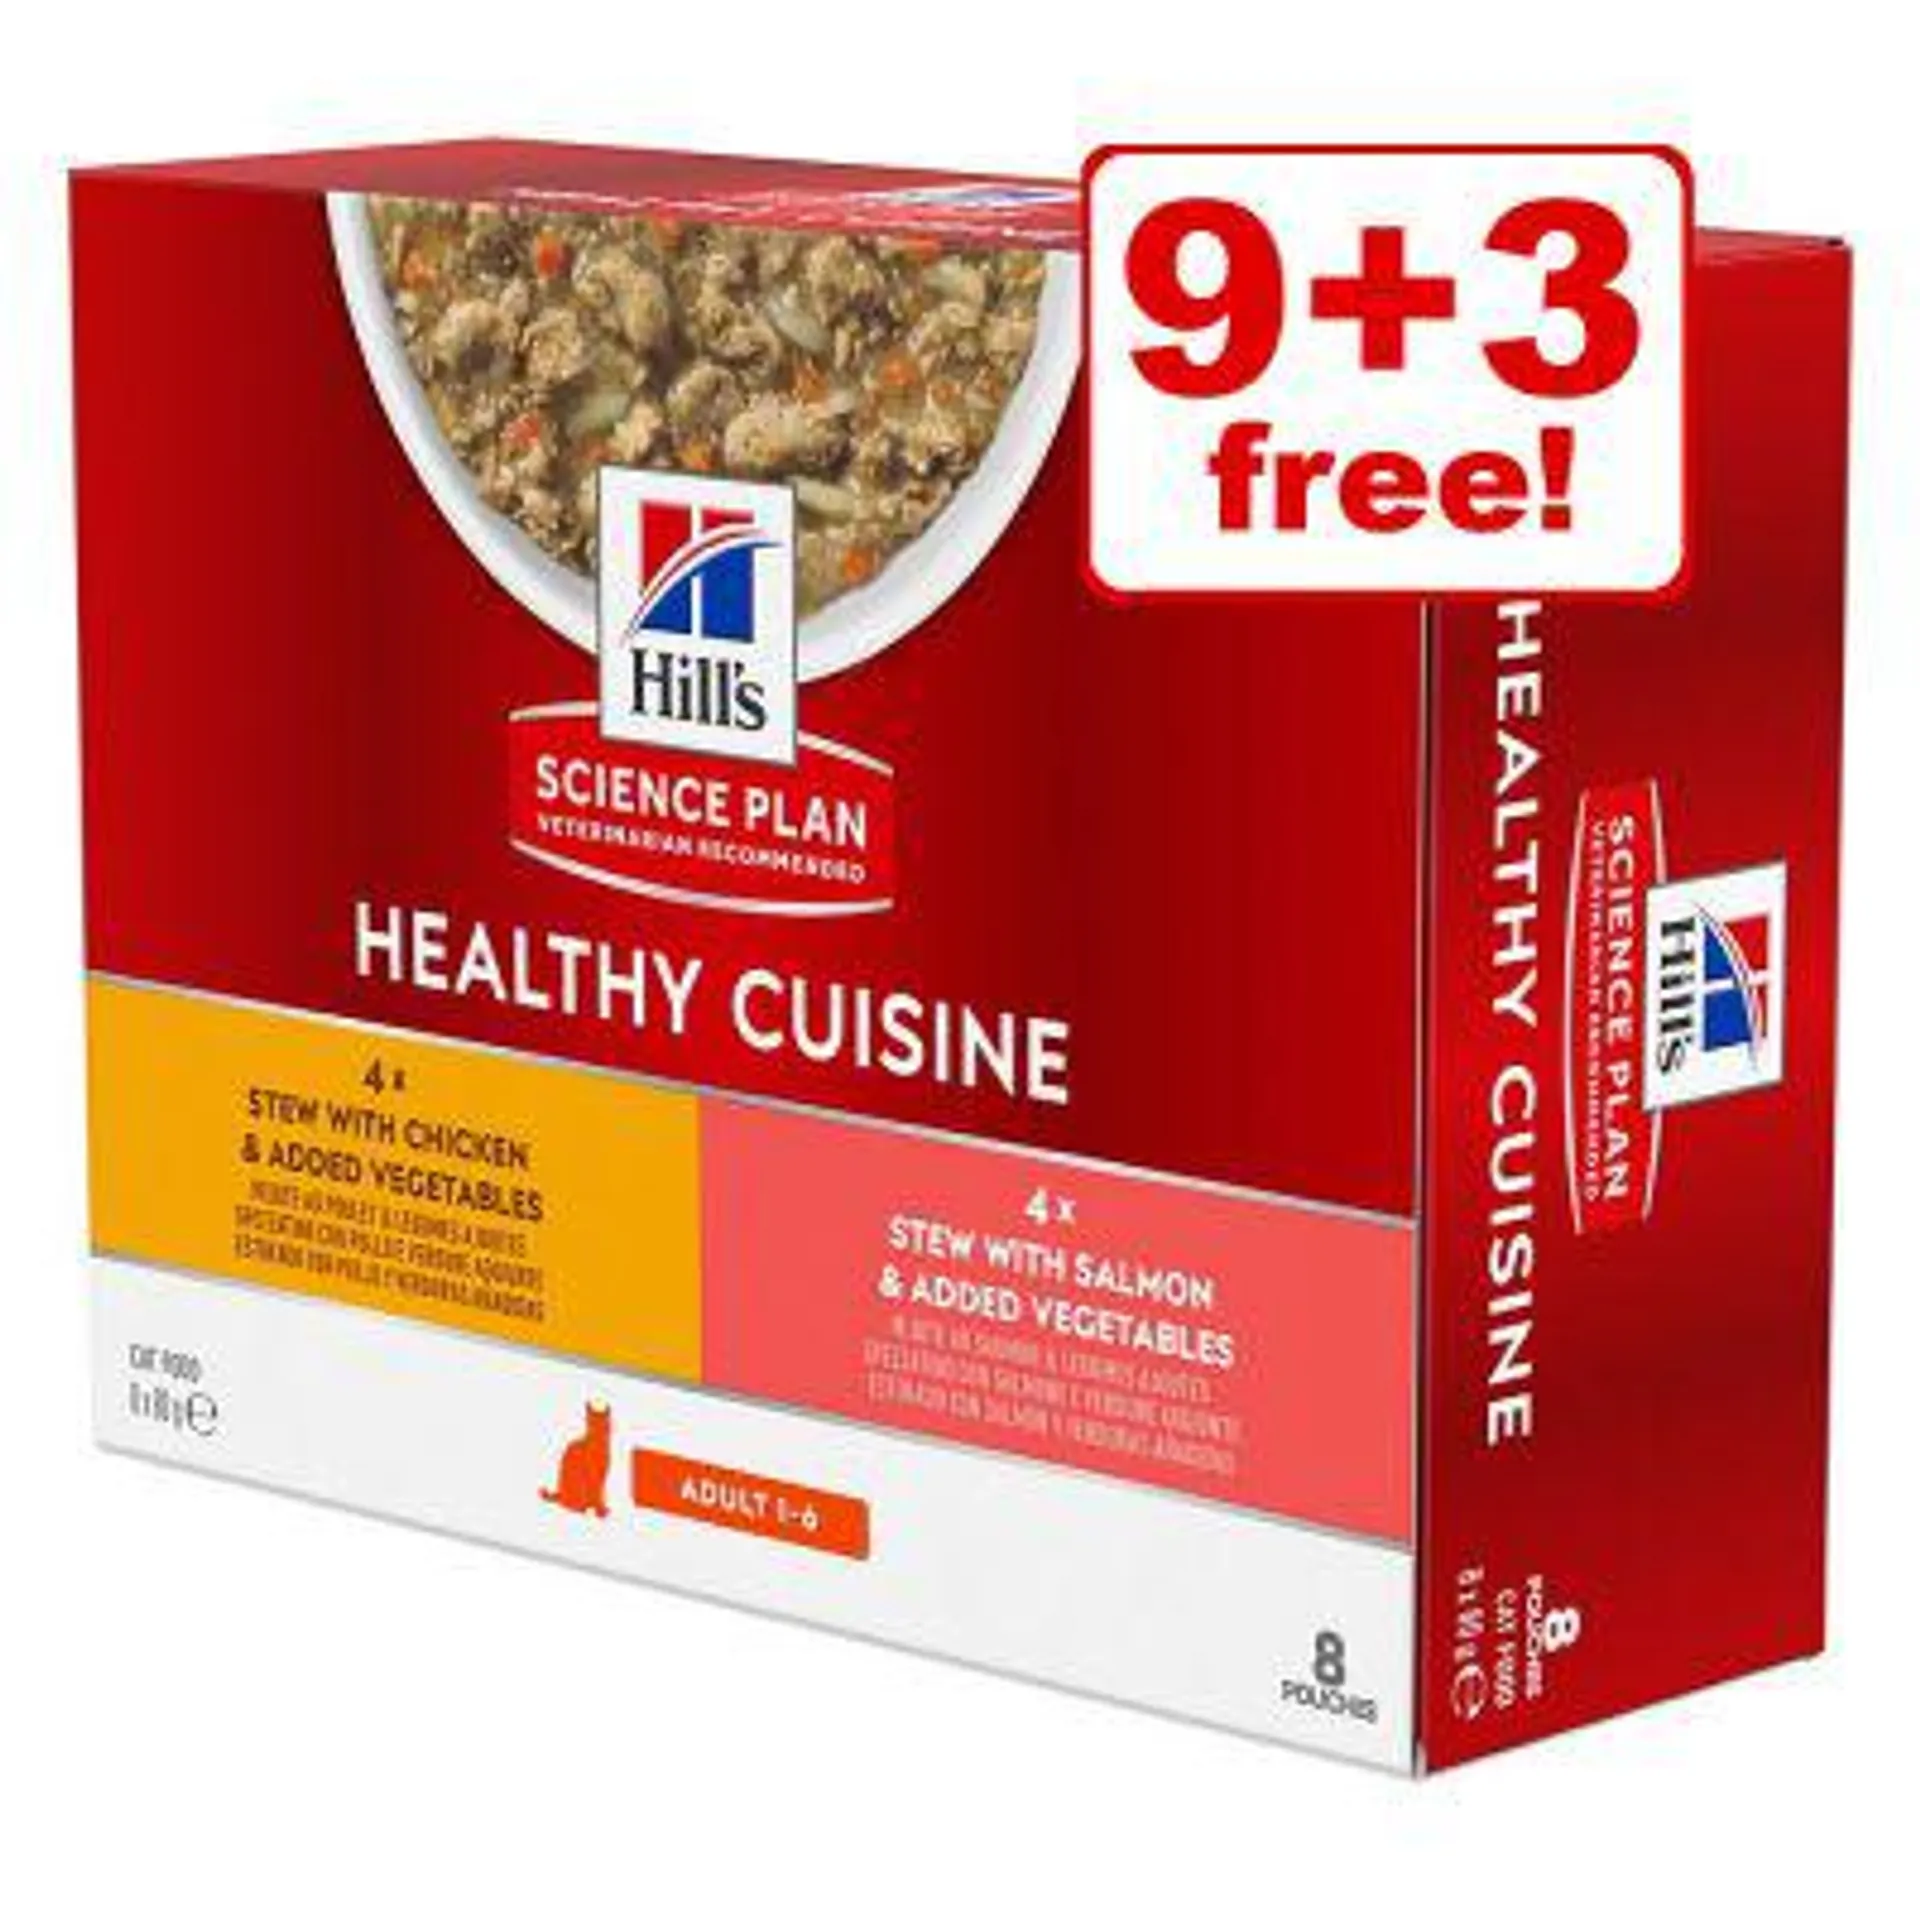 12 x 80g Hill's Science Plan Healthy Cuisine - 9 + 3 Free!*